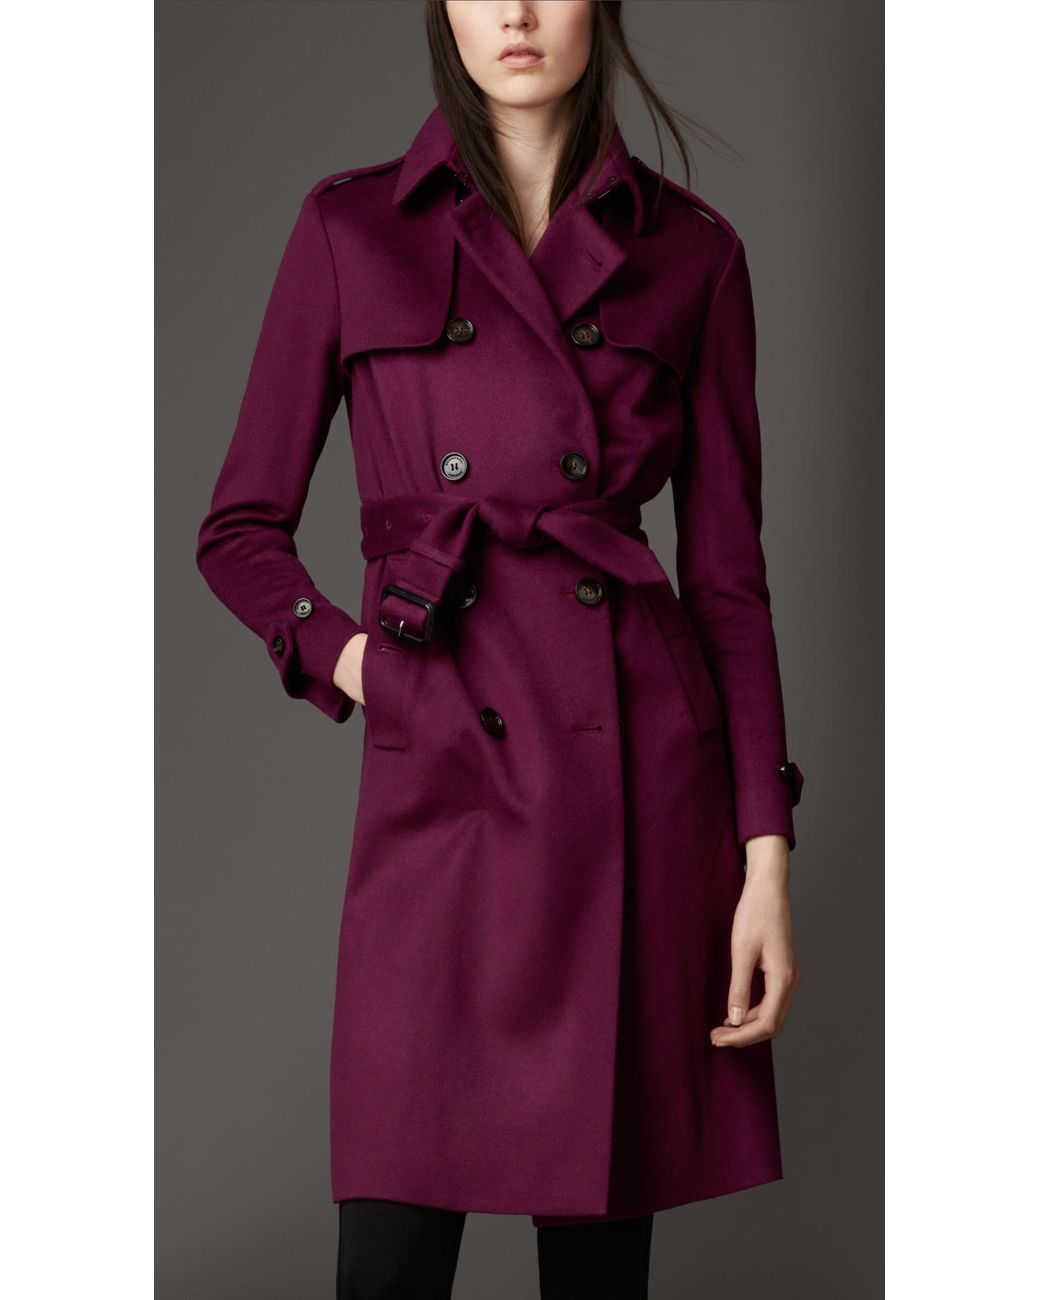 Burberry Long Double Cashmere Trench Coat in Purple | Lyst UK